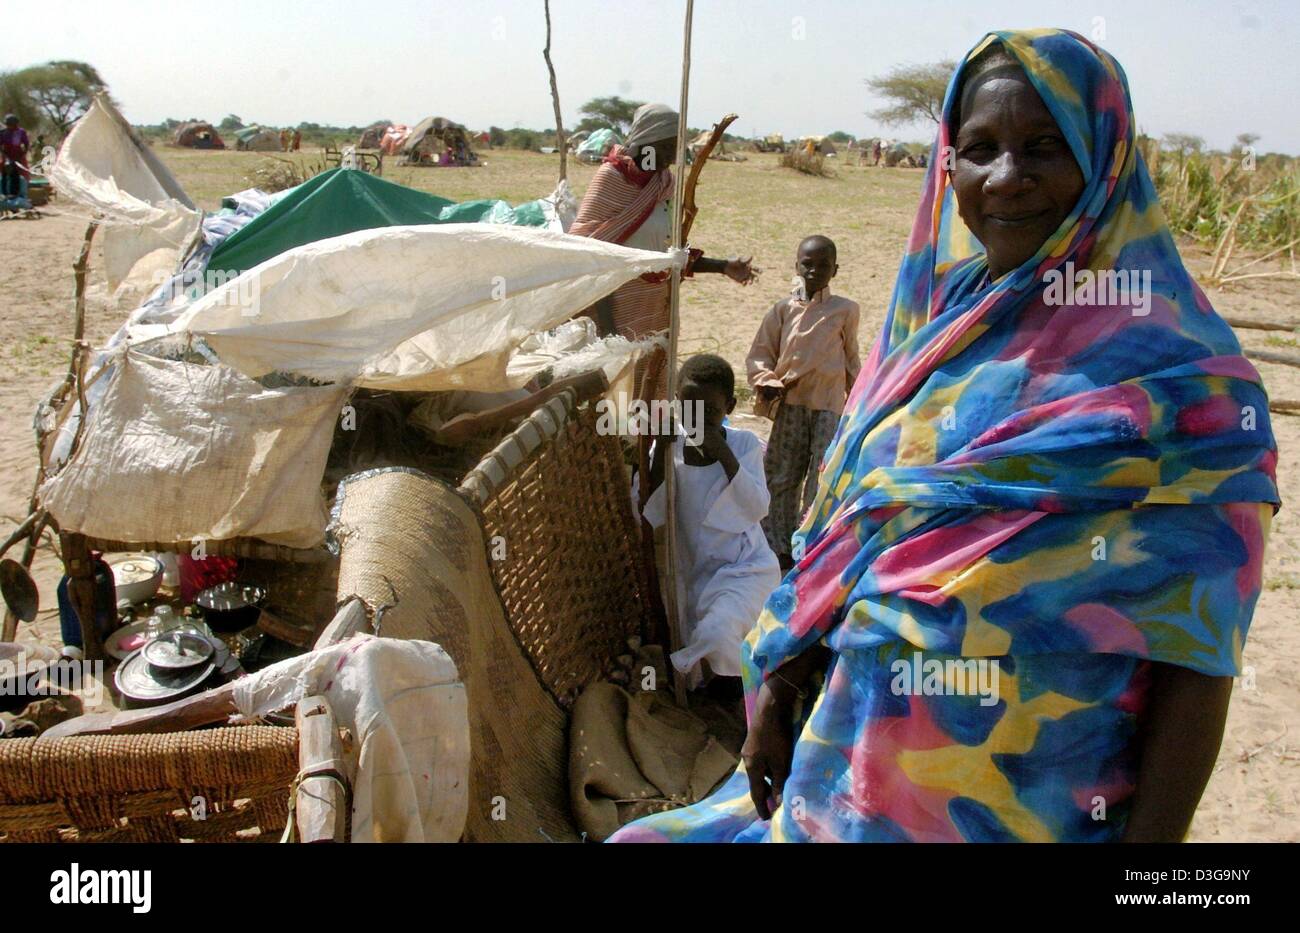 (dpa) - A woman stands next to the remains of her belongings in the refugee camp in Nyala, in the province of Darfur, Sudan, 13 July 2004. Arab militiamen are terrorising the local population. Stock Photo